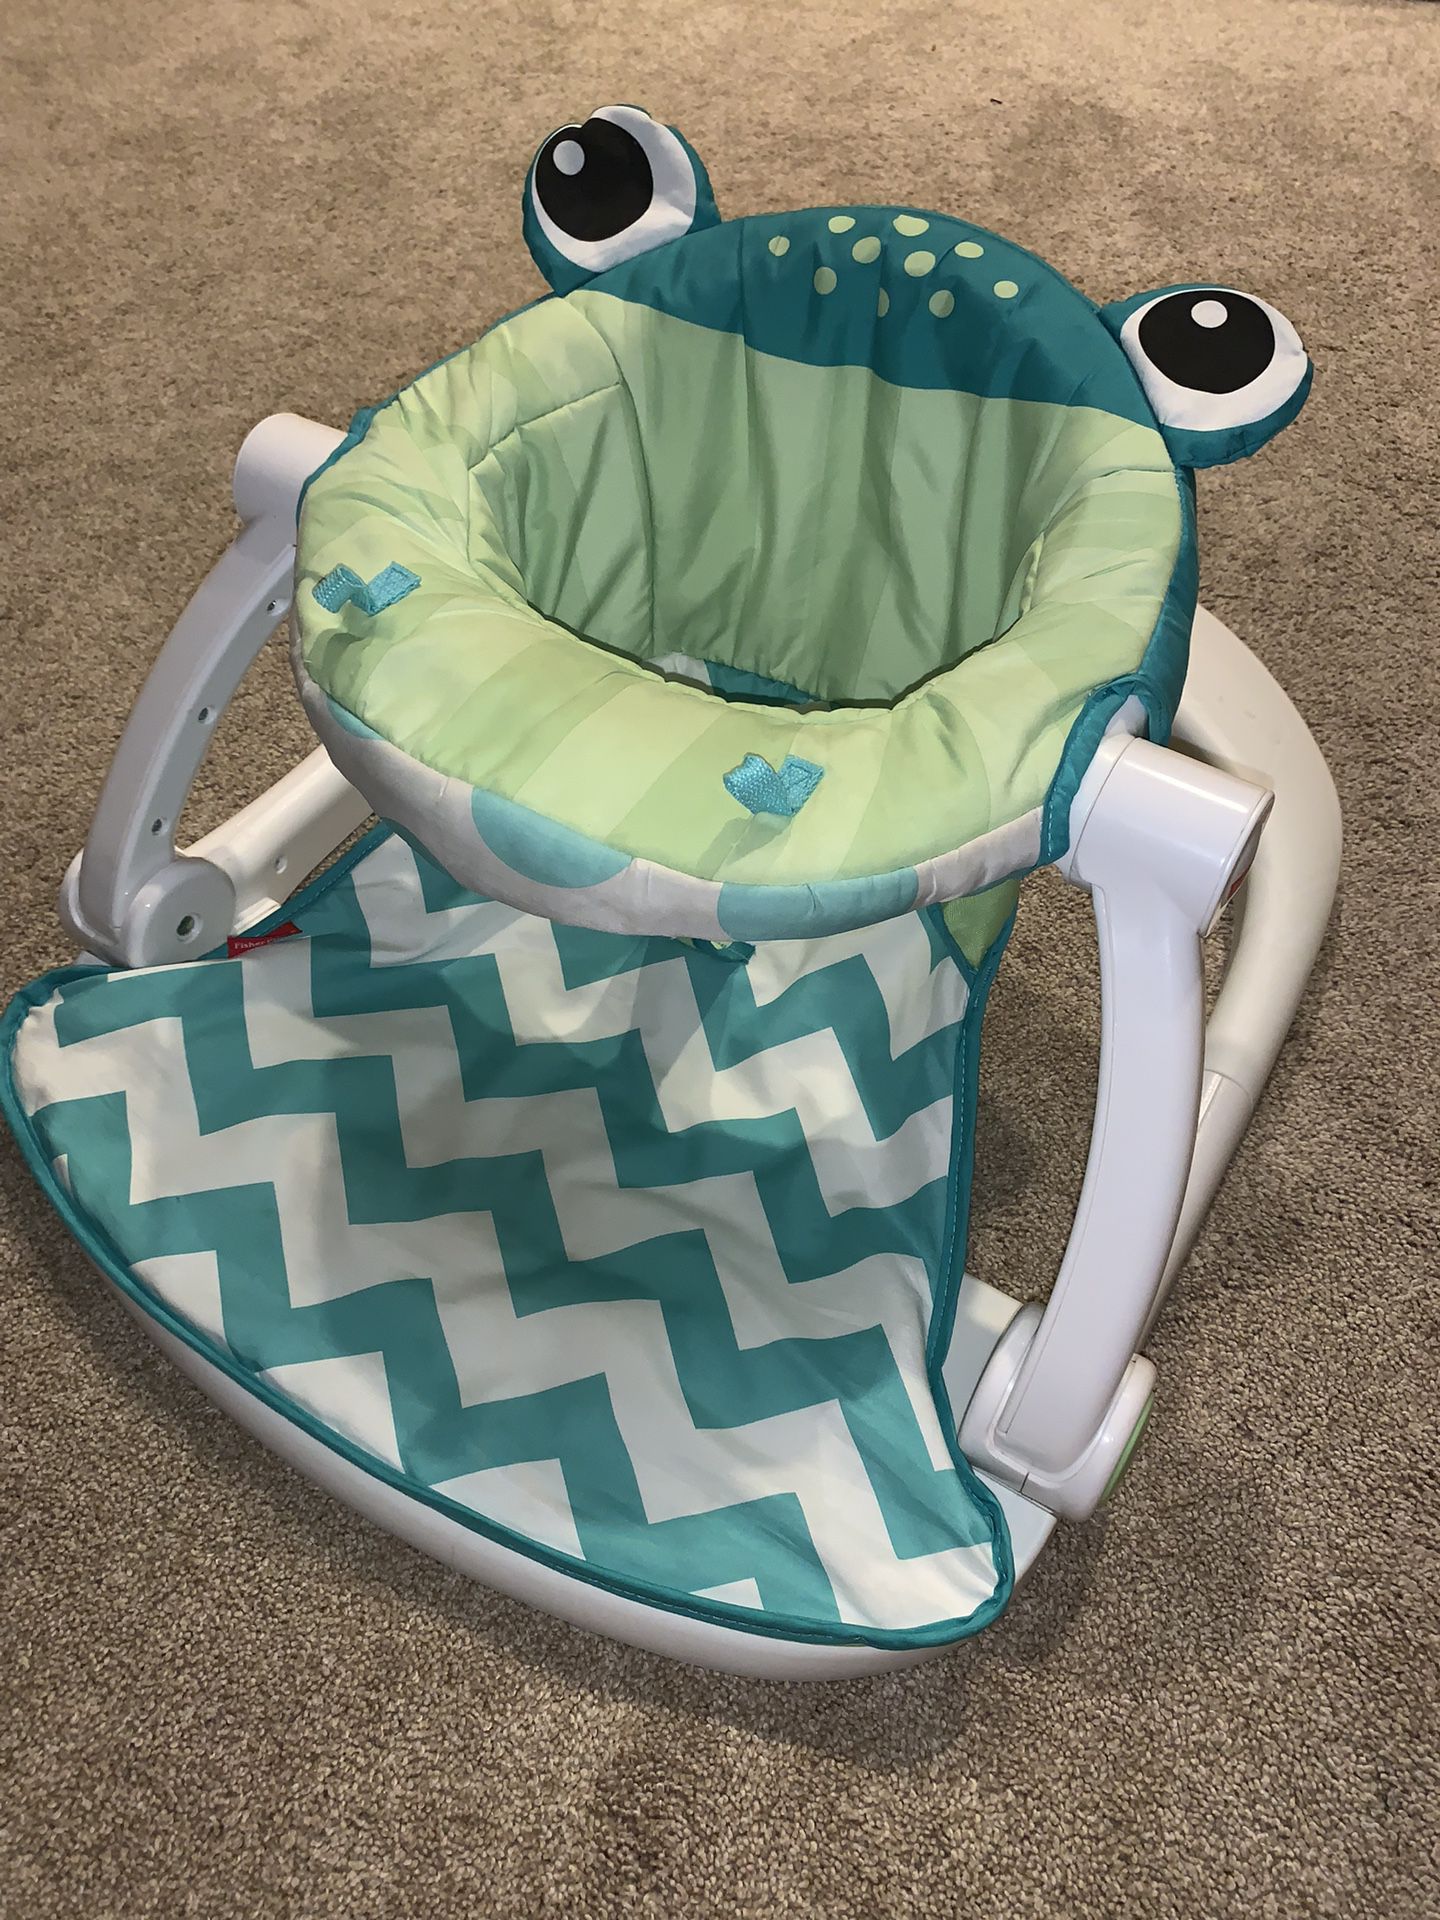 Fisher-Price Sit-Me-Up Floor Seat For Baby 